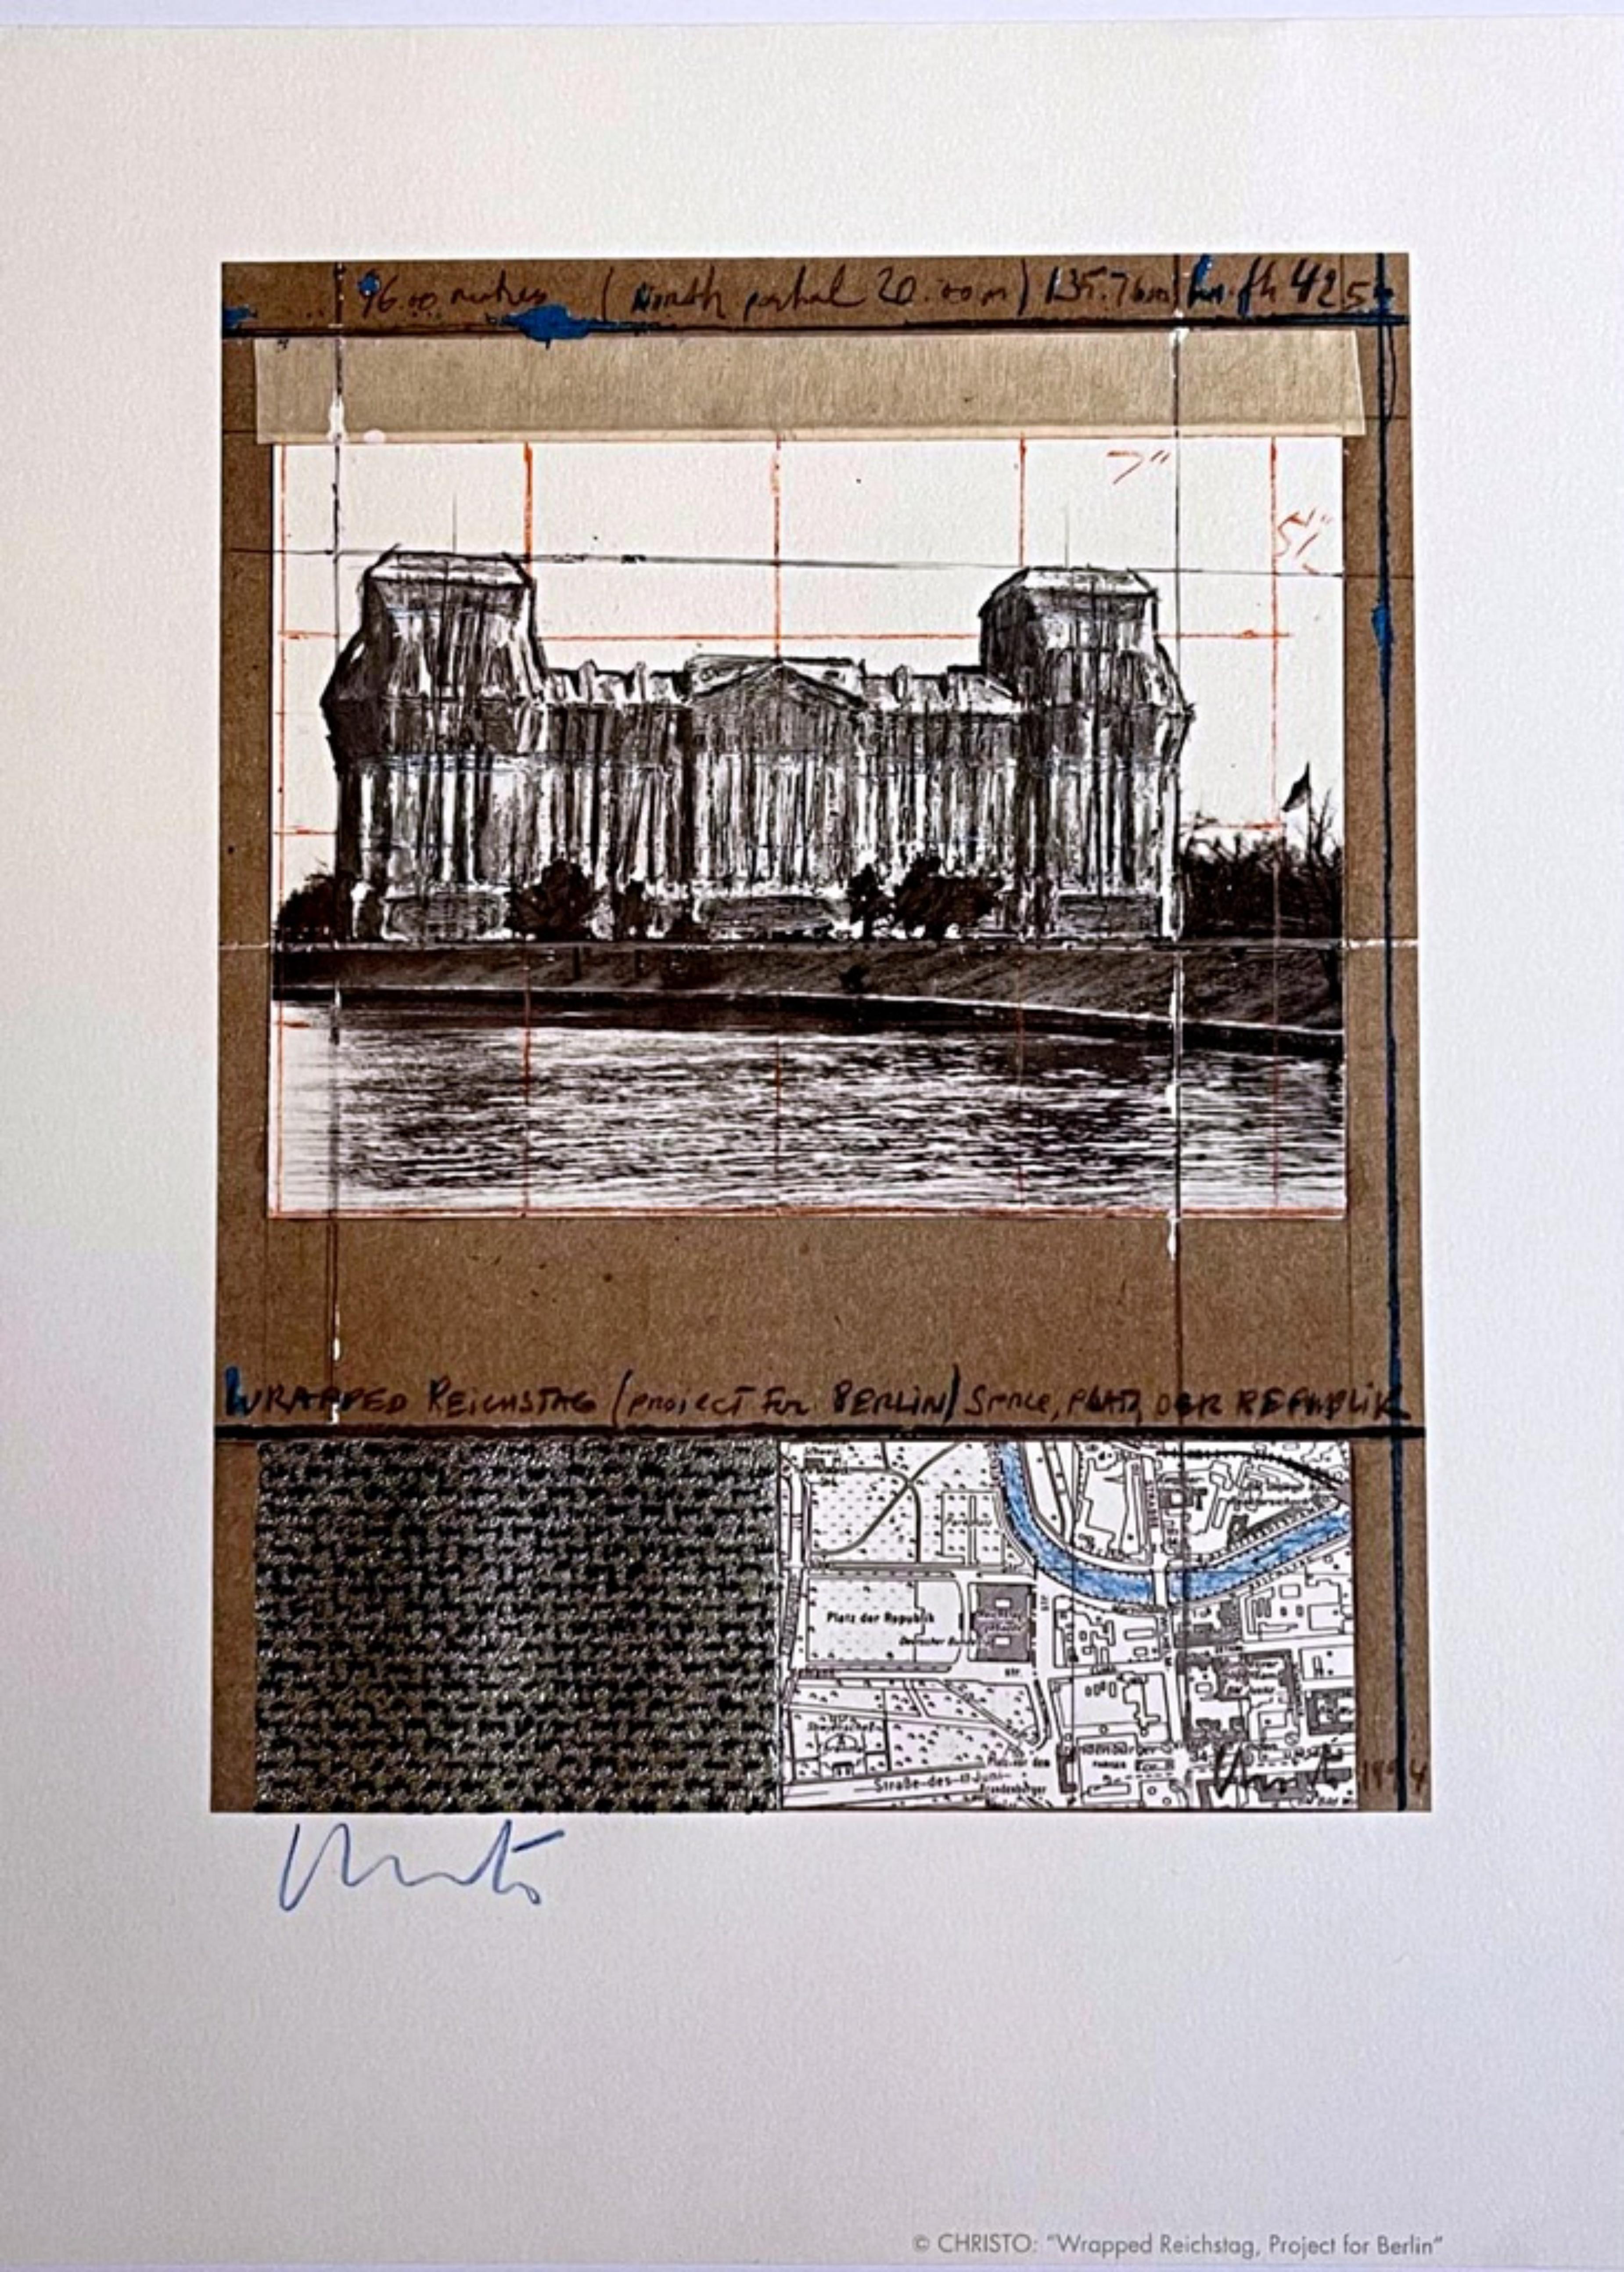 Wrapped Reichstag, Berlin, collage with raised thermal silver paper, hand signed - Mixed Media Art by Christo